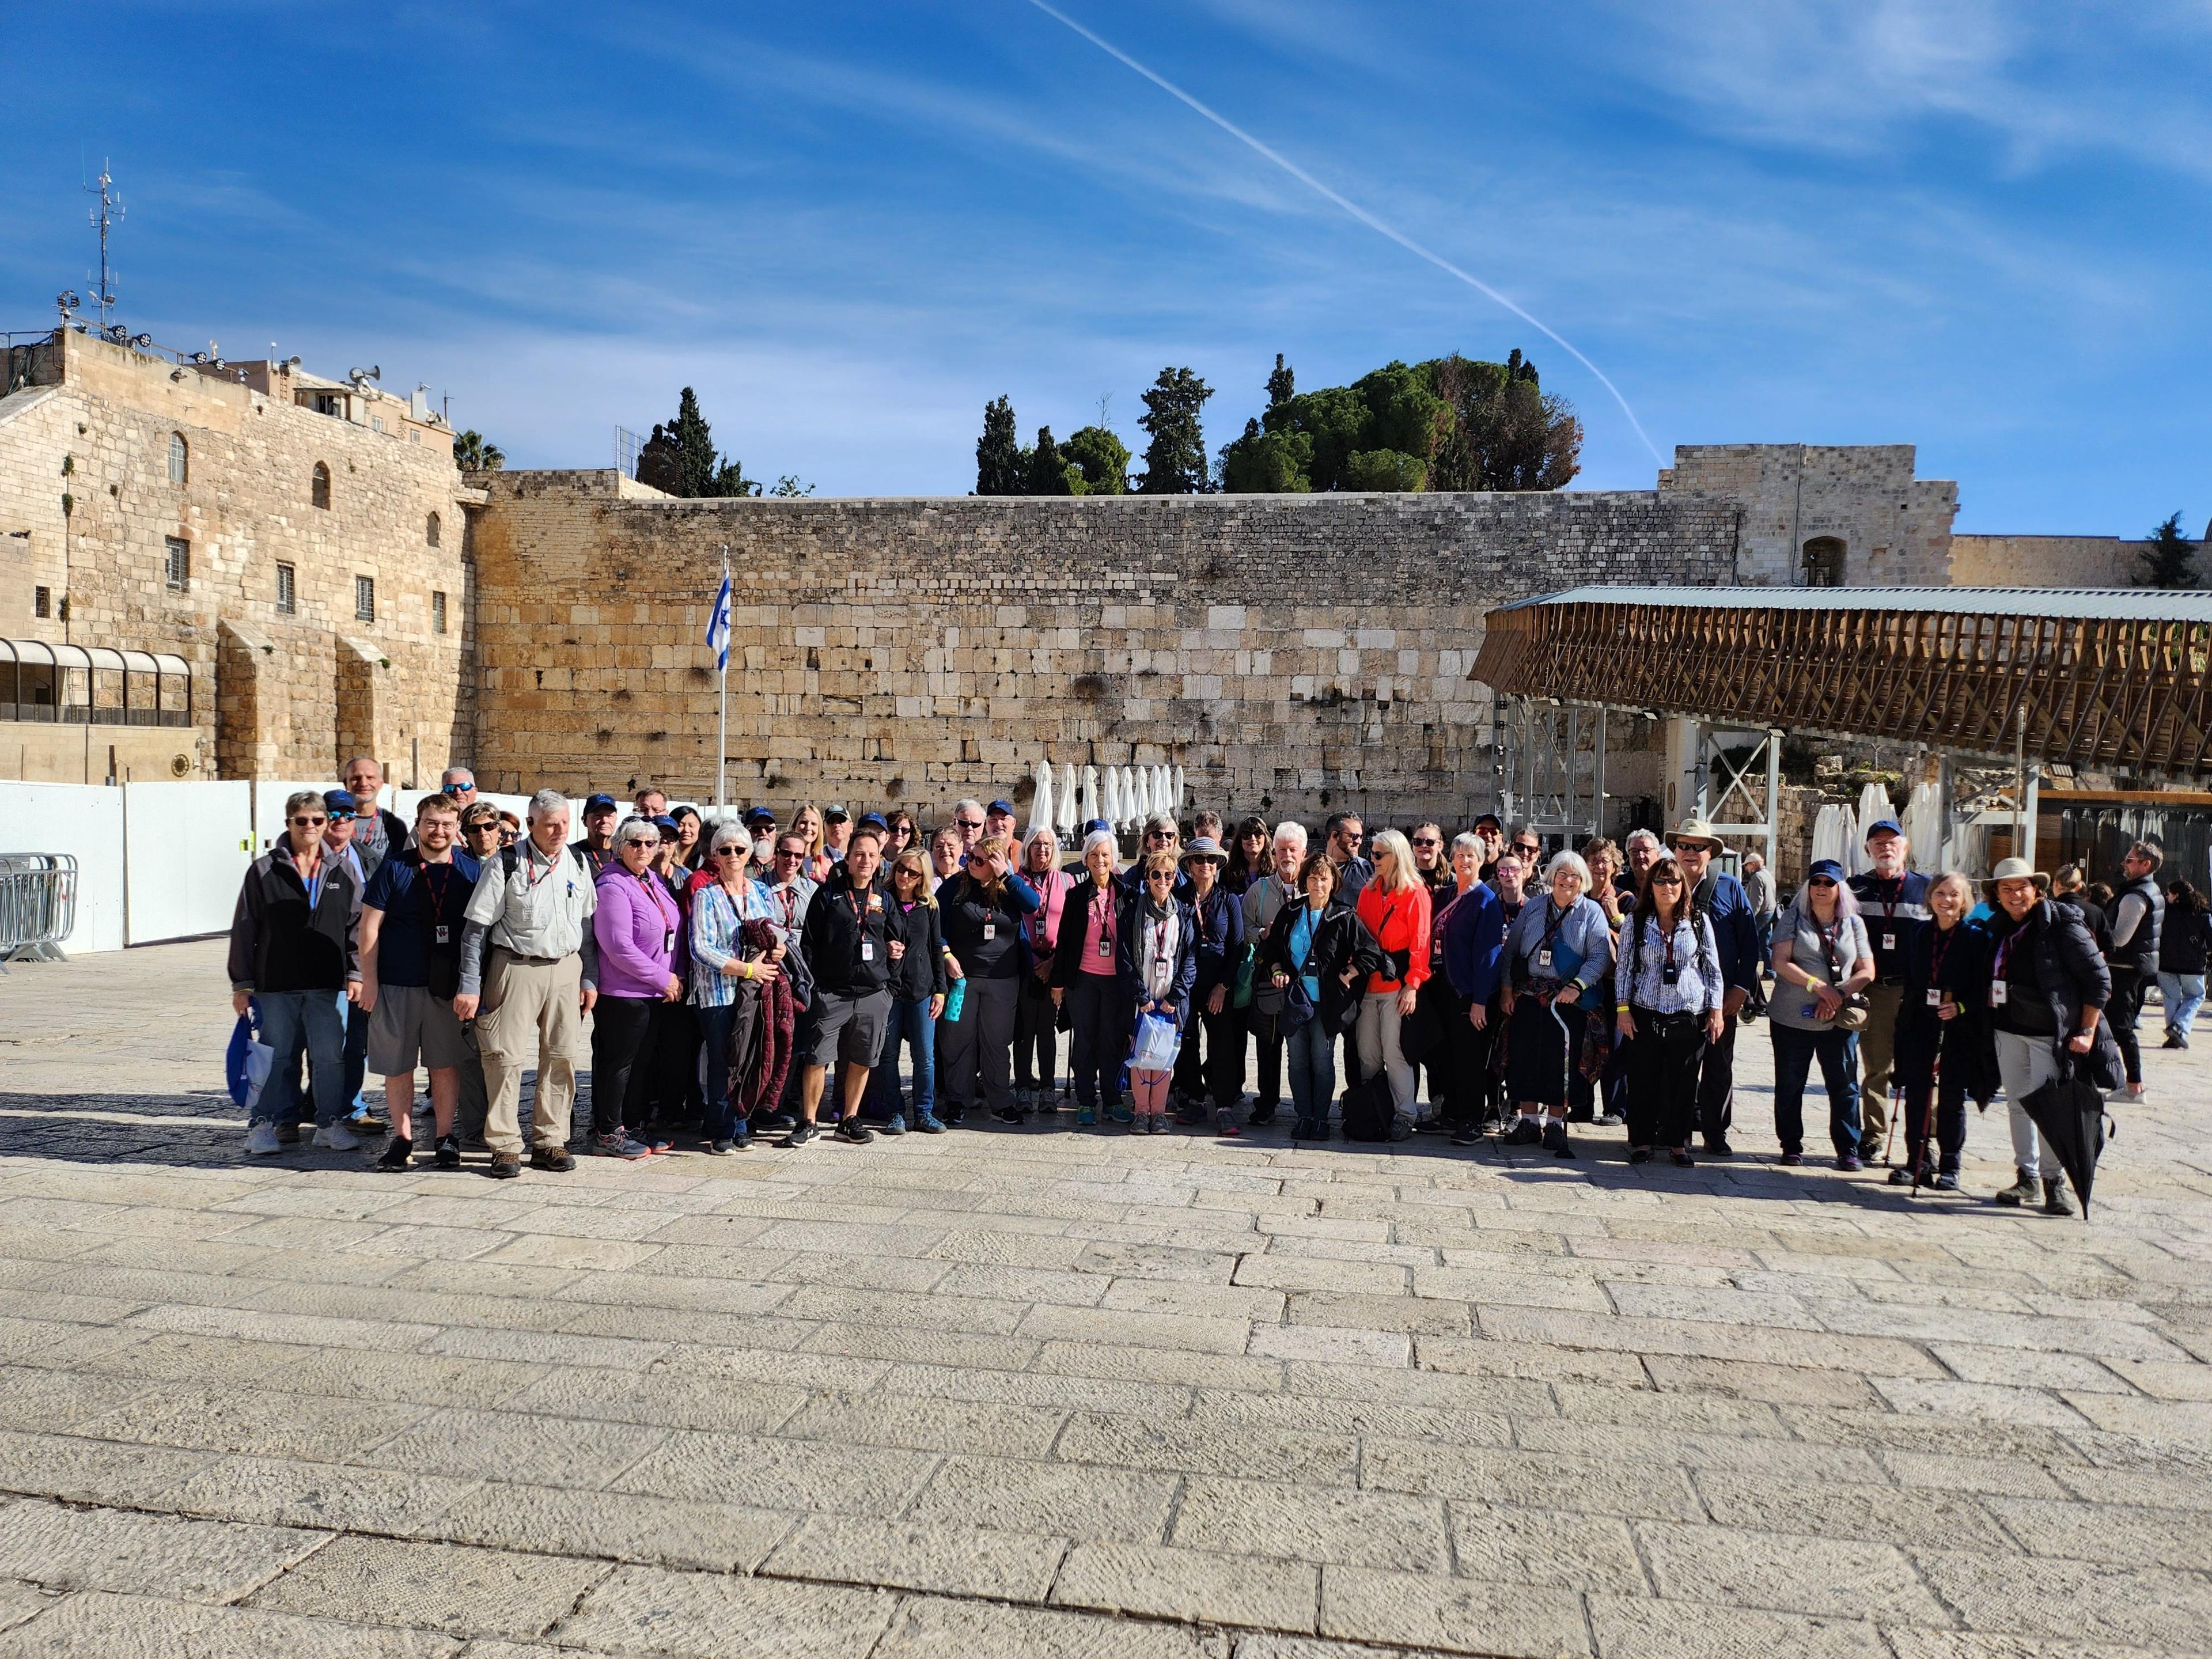 holy land tours 2023 from south africa